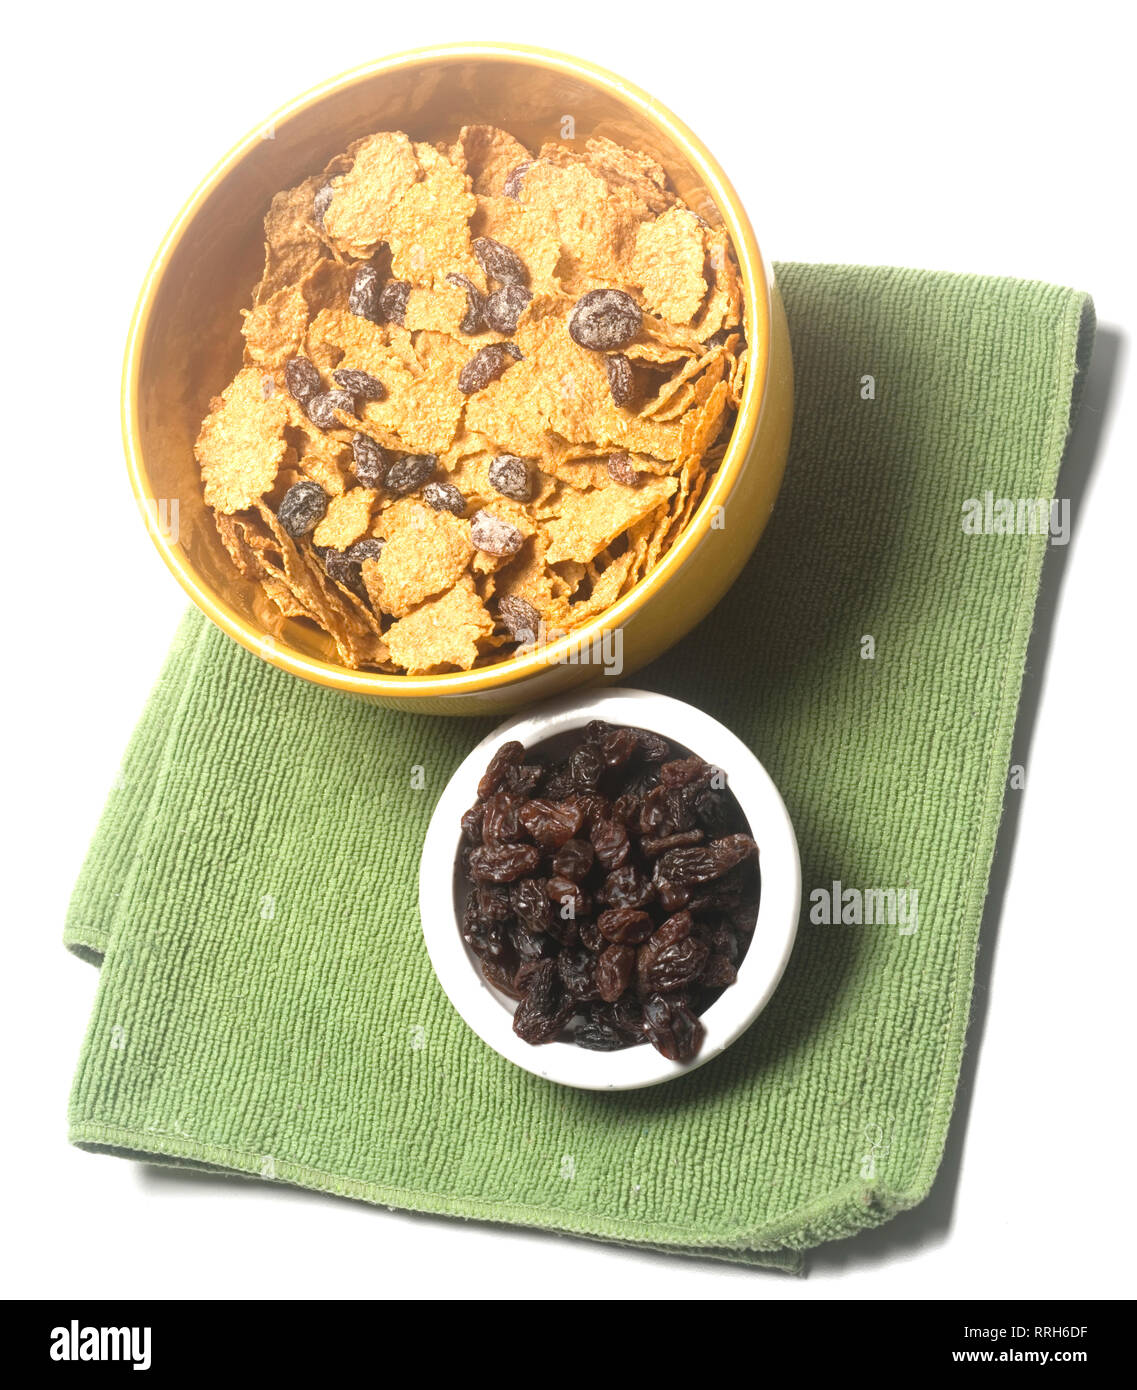 breakfast cereal bowl of raisin bran with bowl of raisins isolated on white Stock Photo